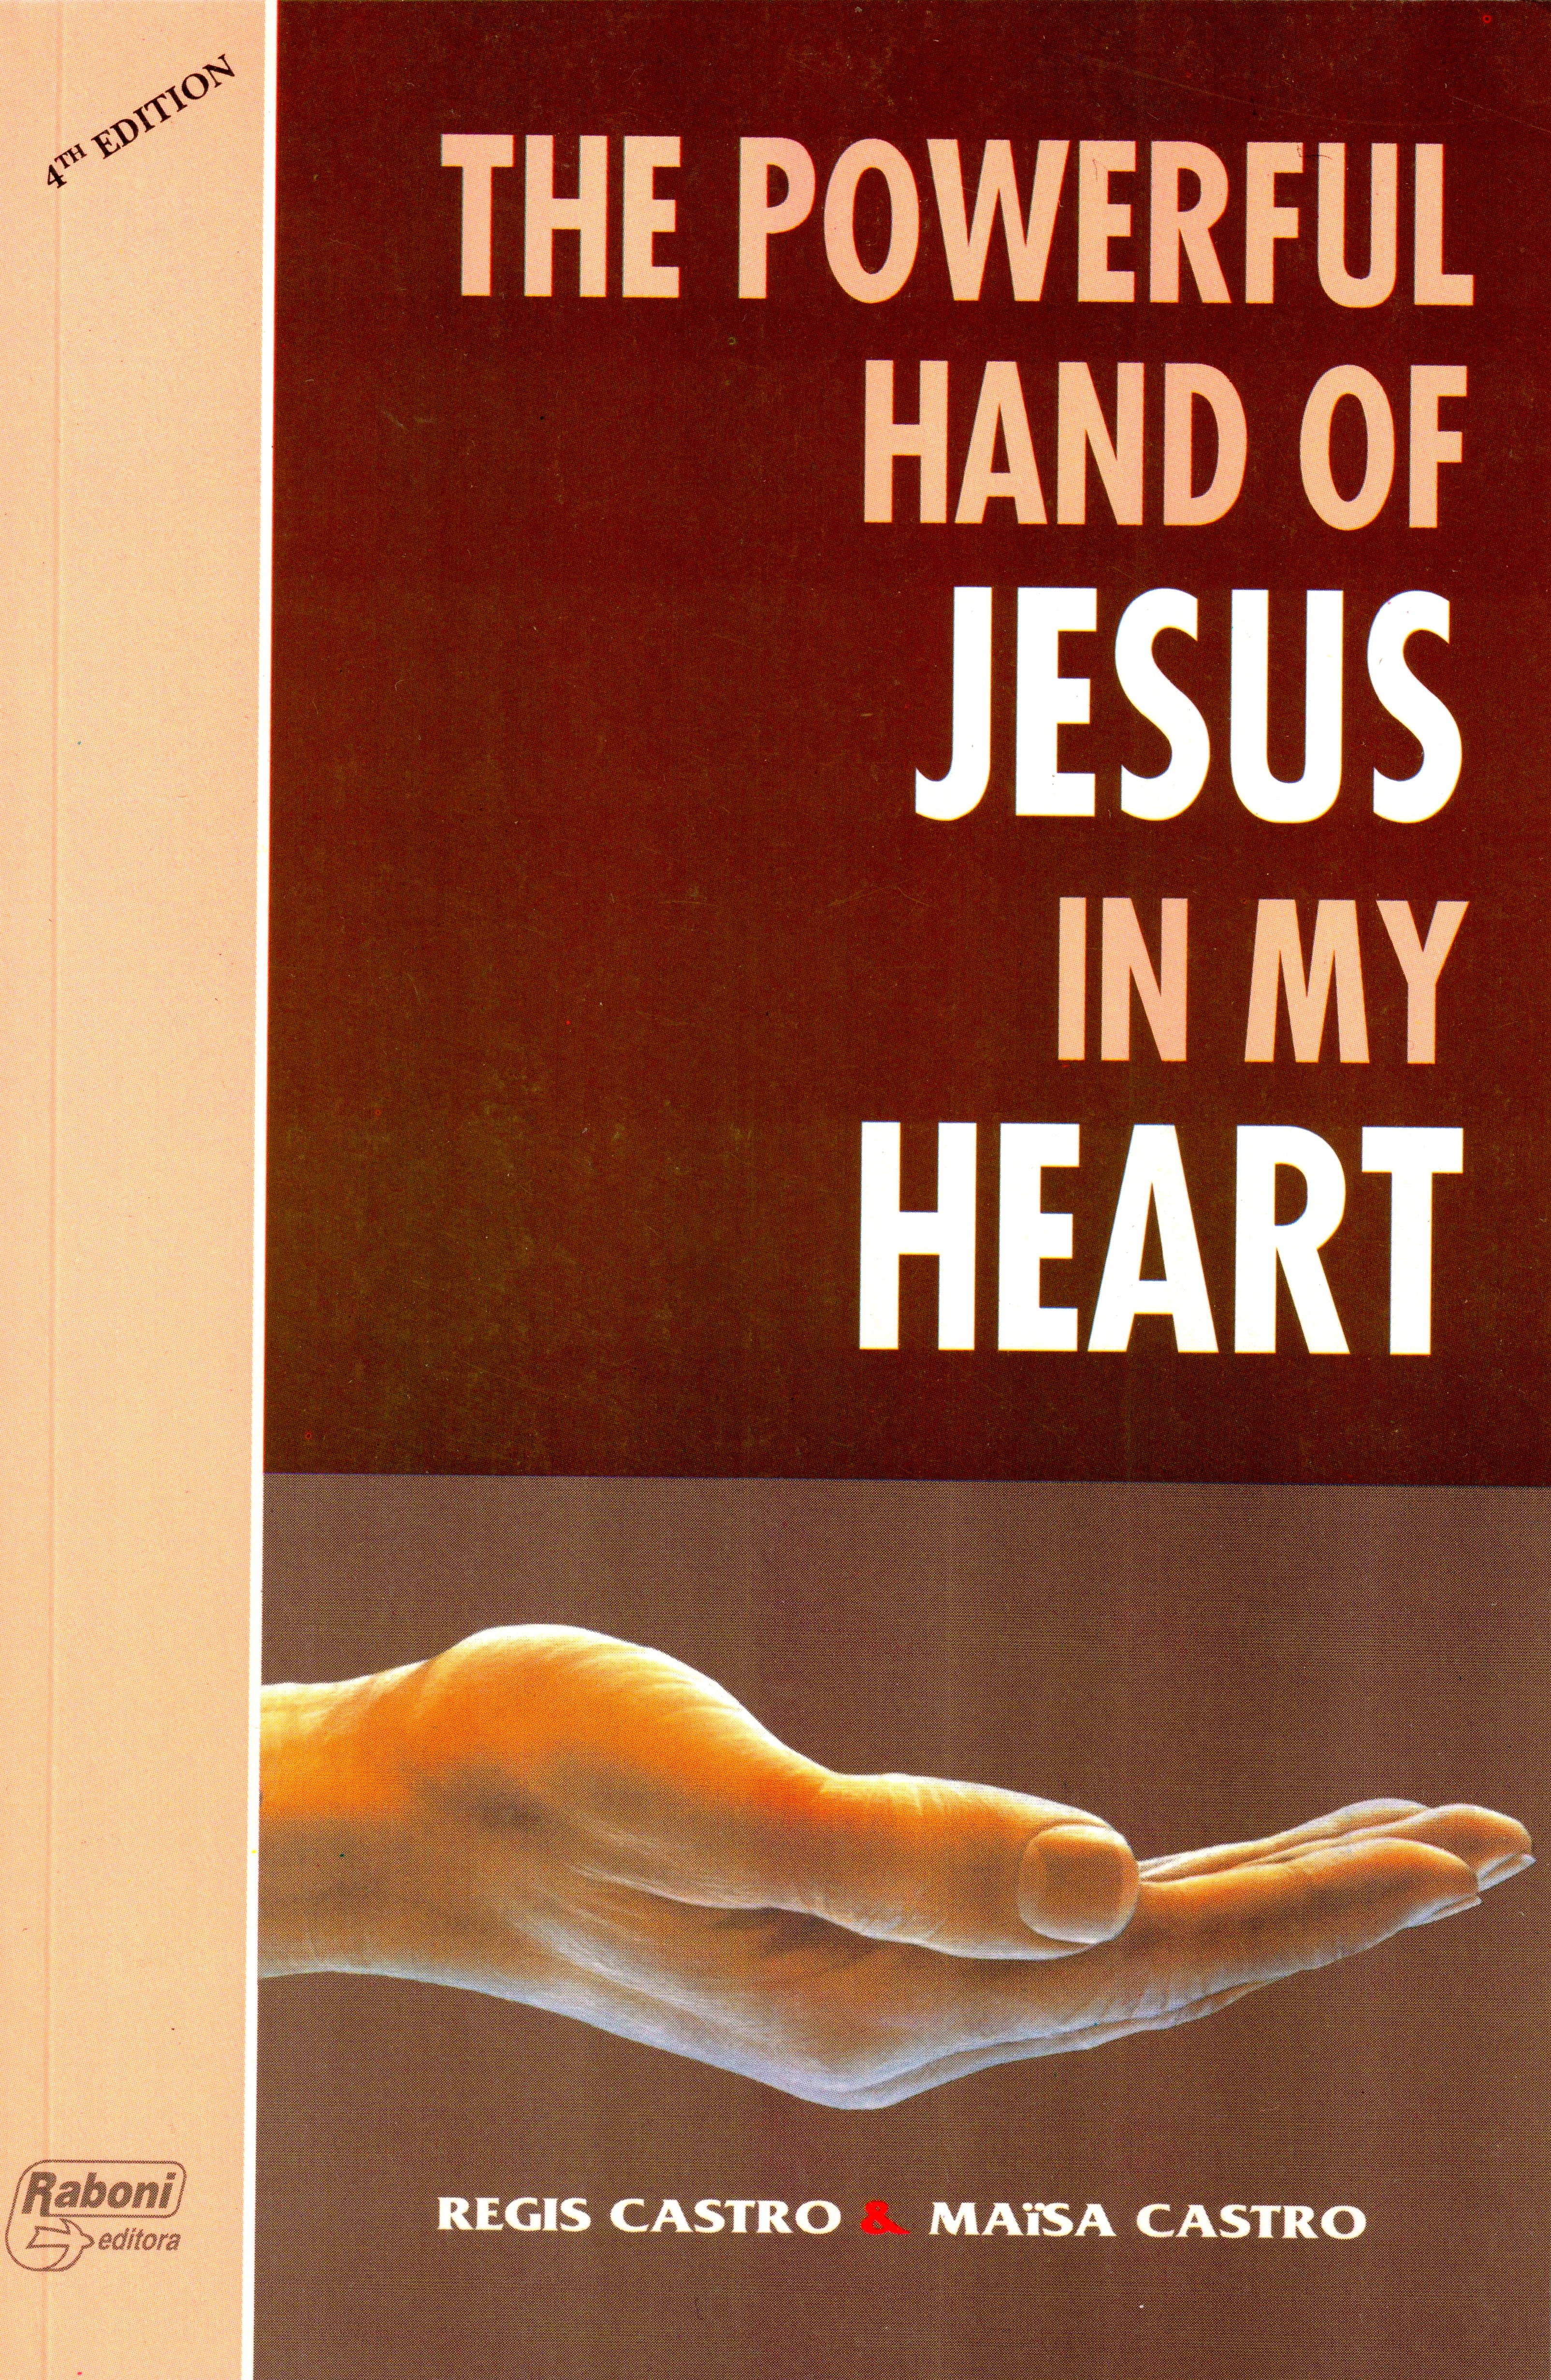 The Powerful Hand of Jesus in My Heart